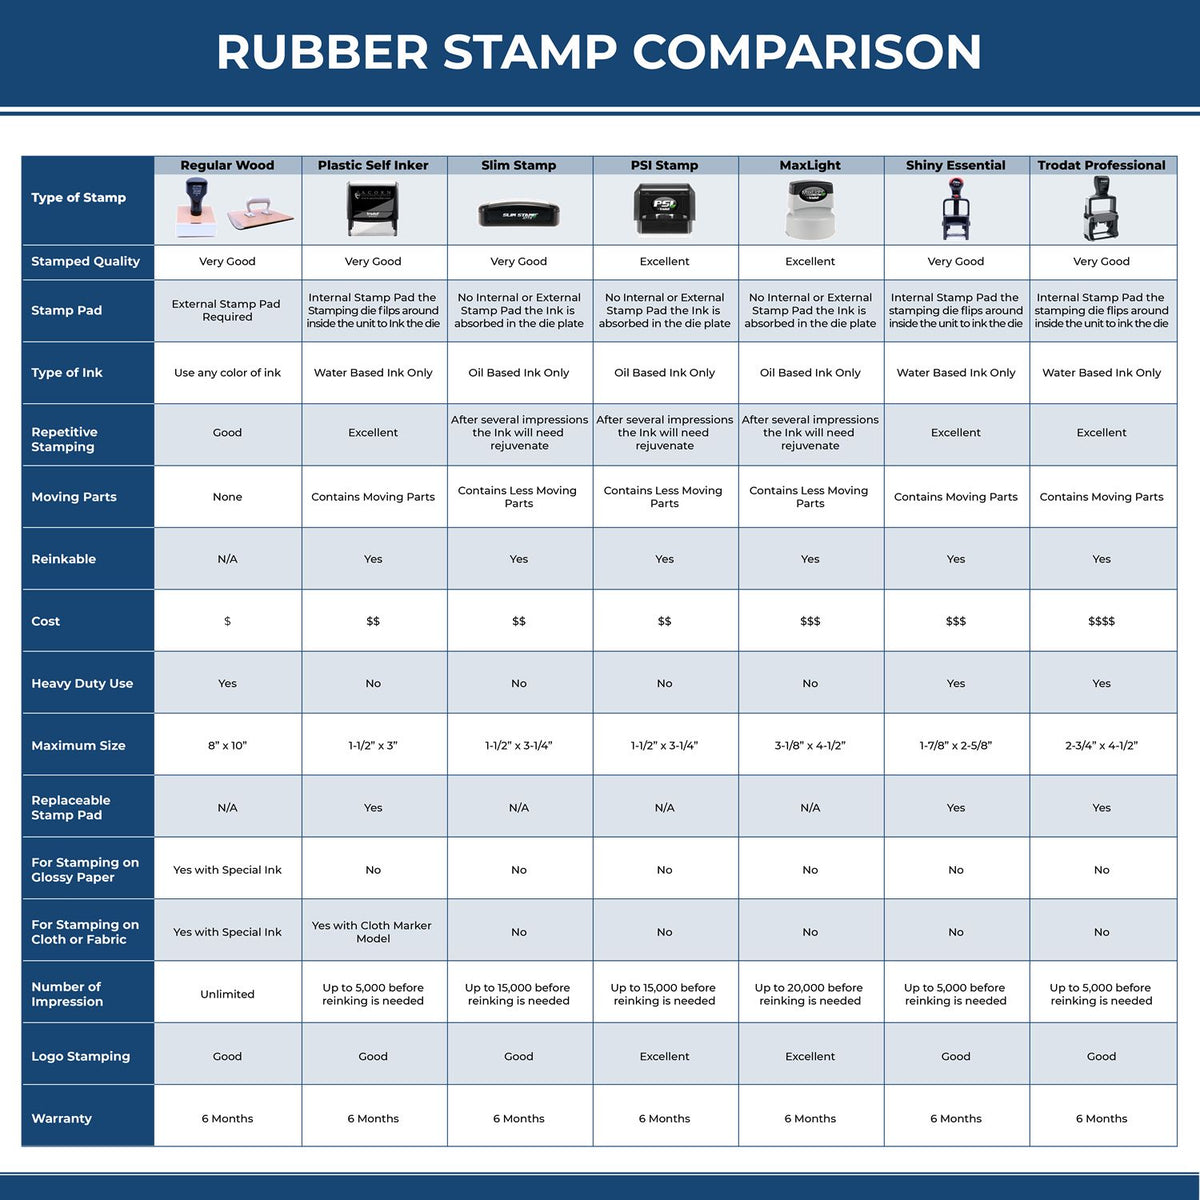 Large Self-Inking Scanned with Line Stamp 5568S Rubber Stamp Comparison